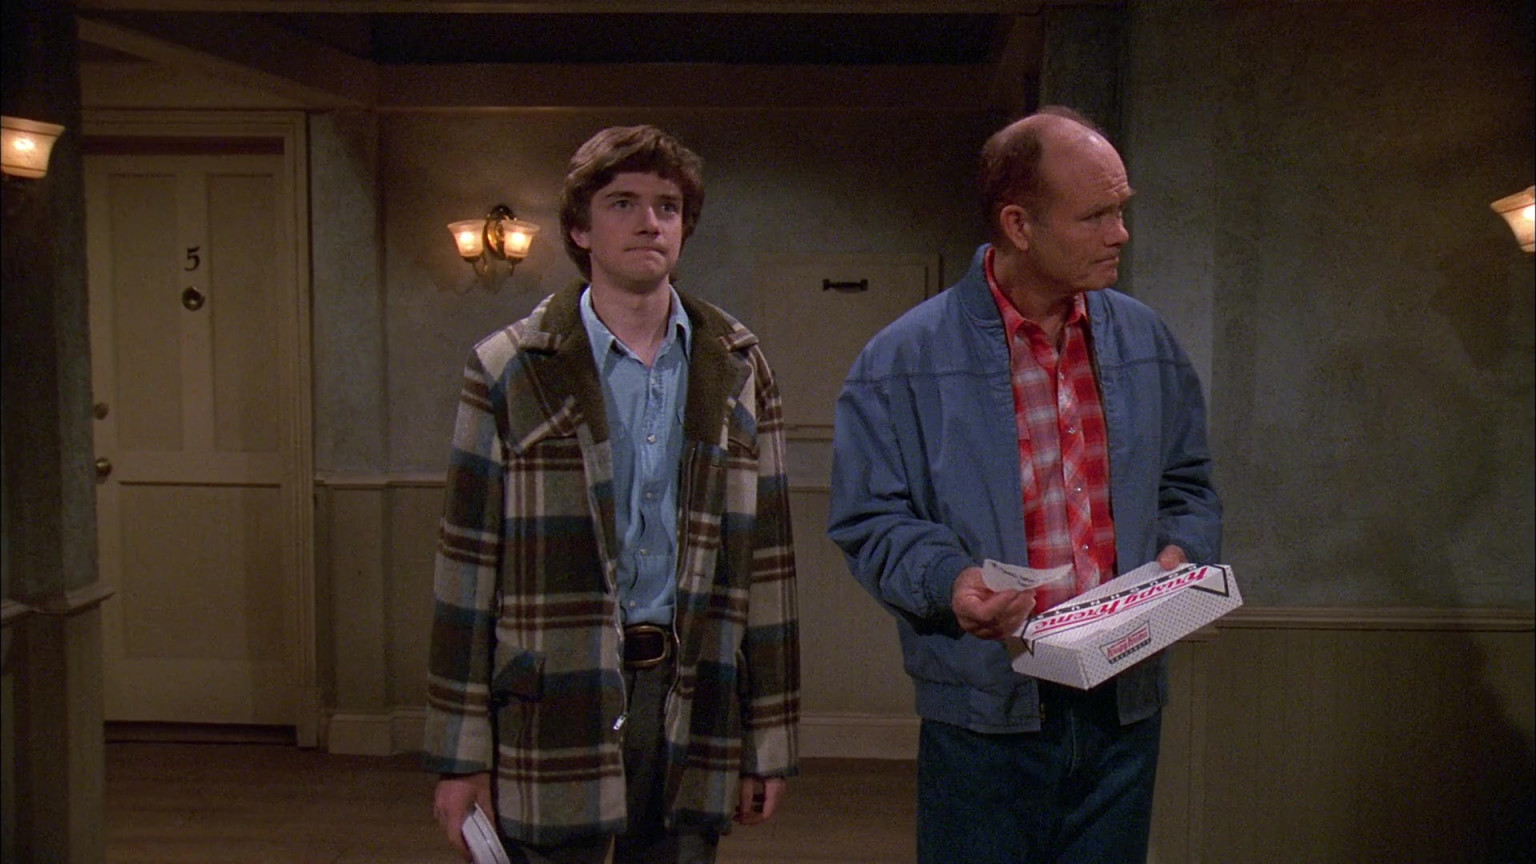 Krispy Kreme Box Held By Kurtwood Smith As Red Forman In That 70s Show